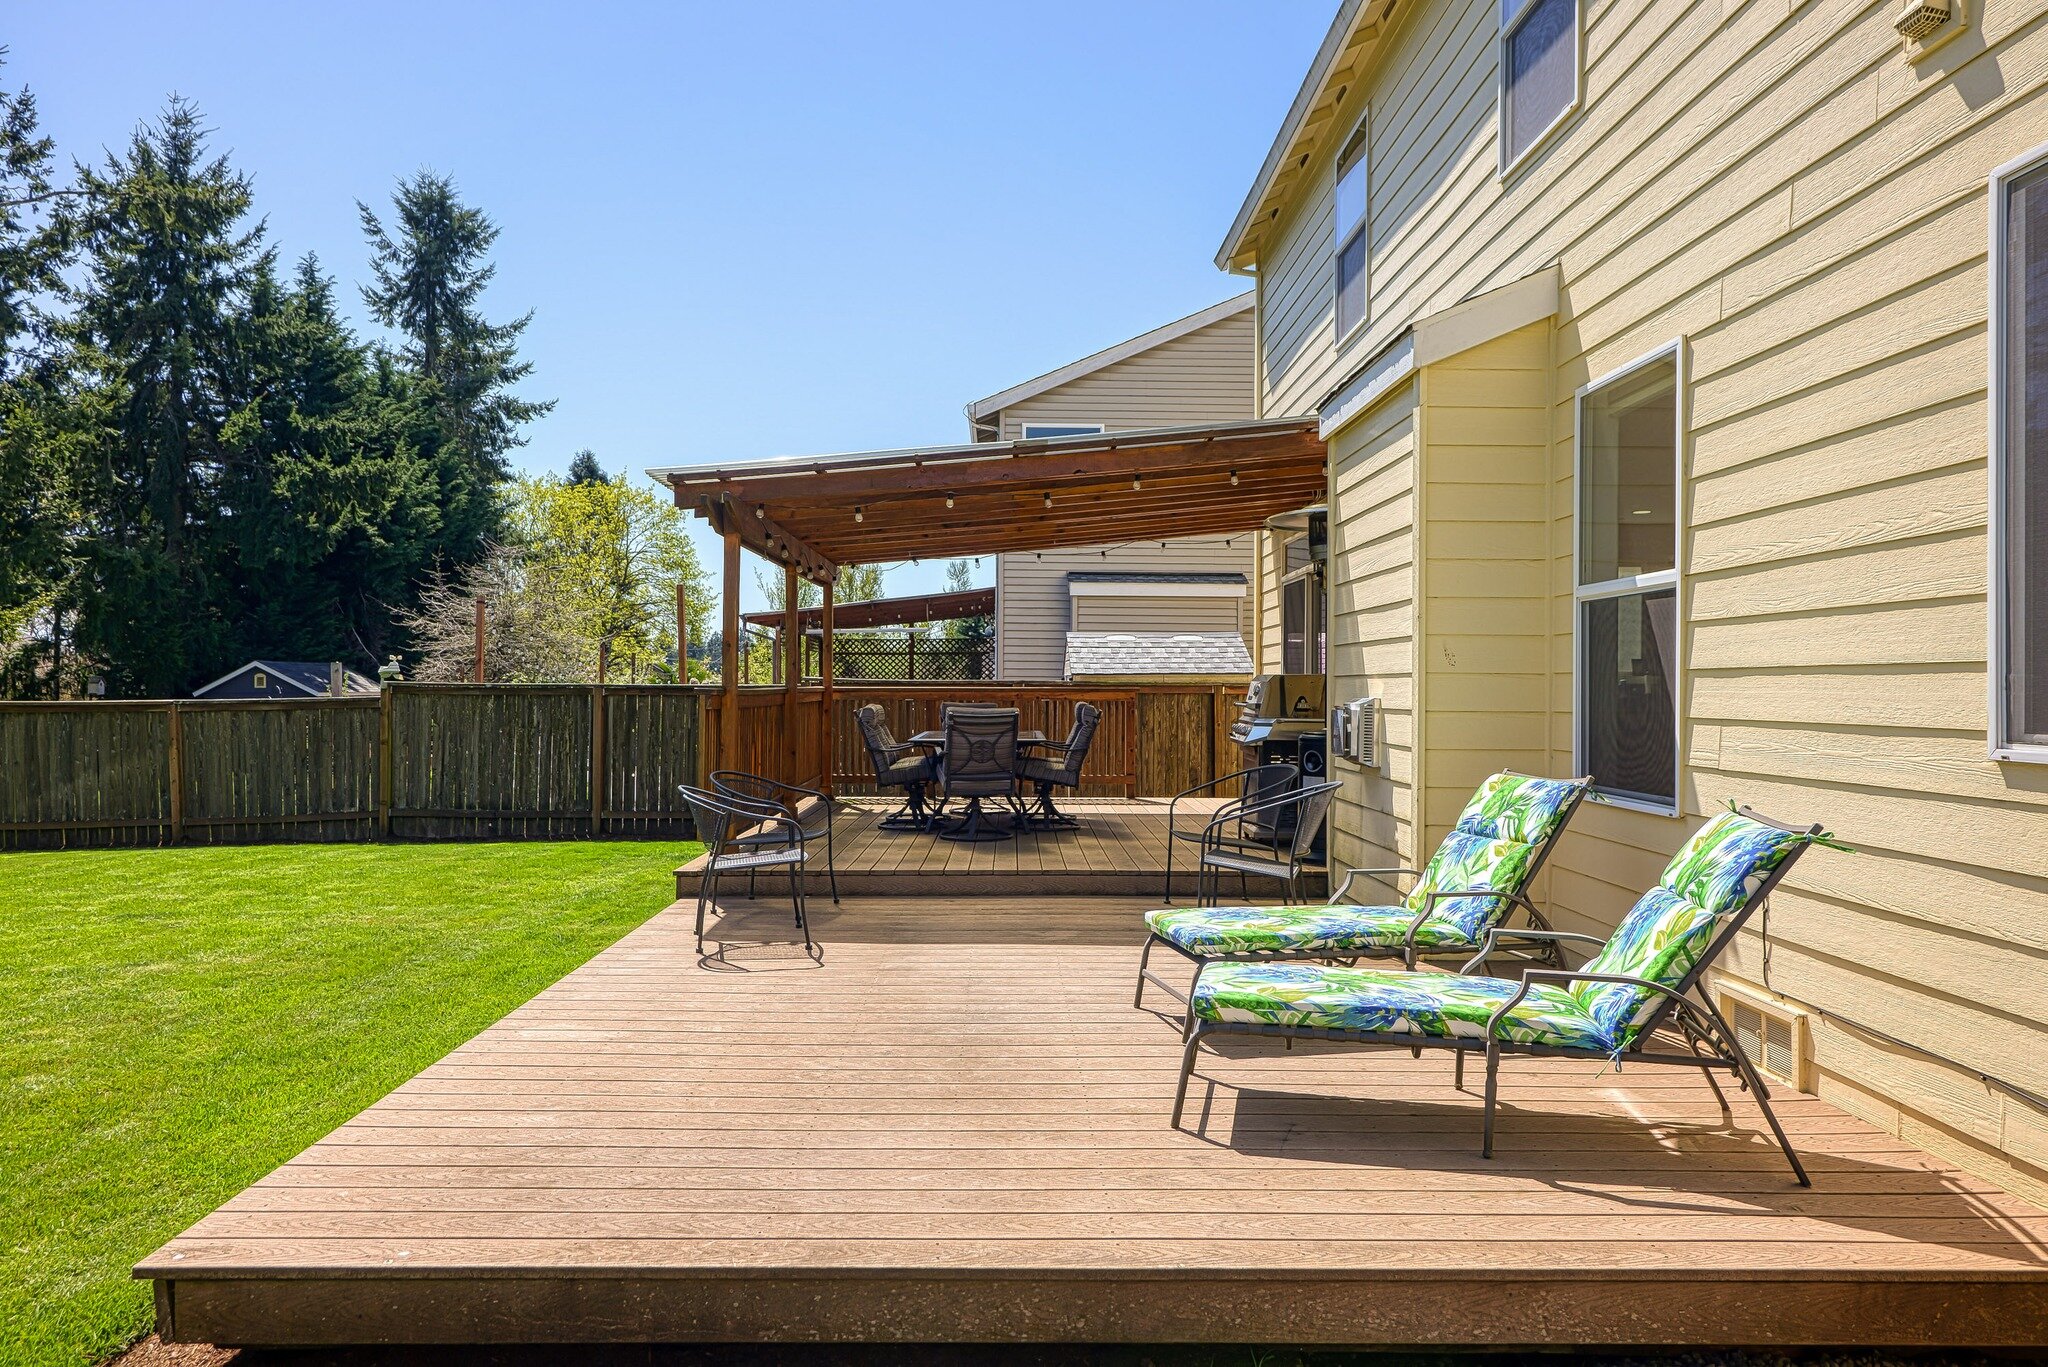 ✨ New Listing in Oregon City ✨

4 Bed | 3 Bath | 2608 SQFT

Step into your own private oasis! This stunning home is situated on a large, flat, fenced lot, and boasts RV parking for your outdoor adventures. The Trex deck and gas connection for your BB